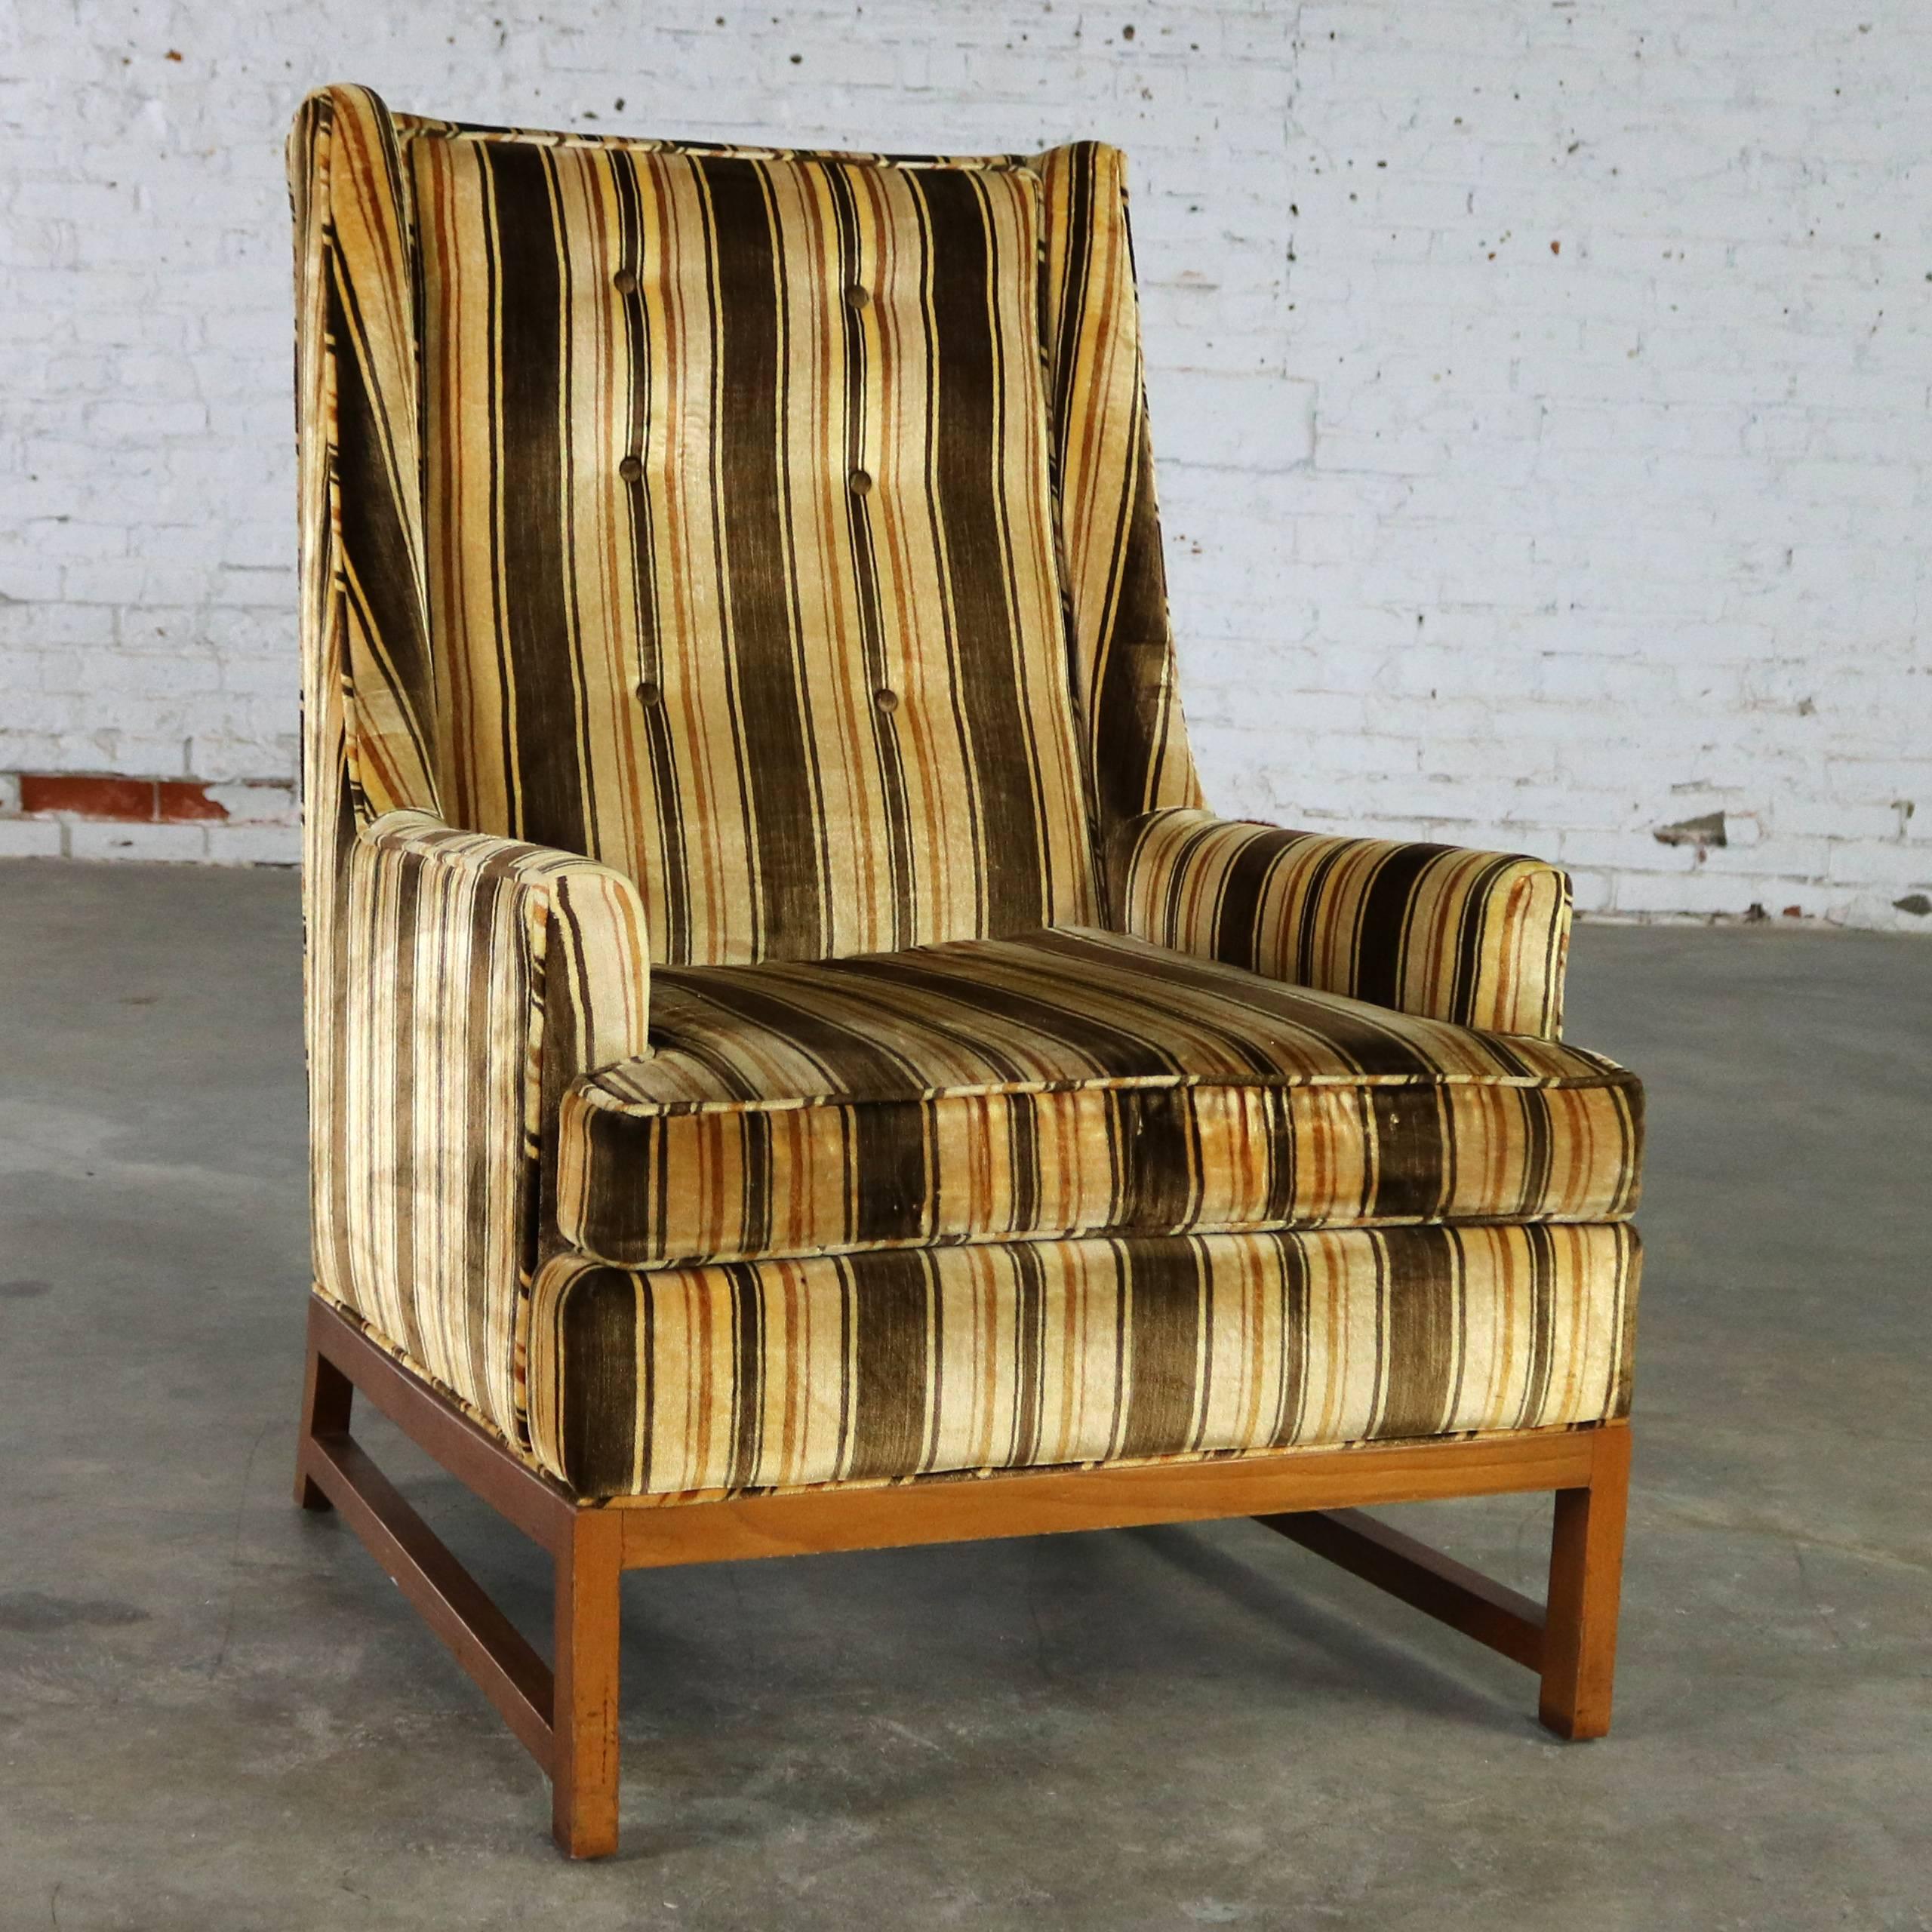 Handsome vintage Mid-Century Modern lounge chair done in the style of Edward Wormley’s Mr. chair for Dunbar. It is in fabulous original vintage condition with its original stripe velvet fabric in the style of Jack Lenor Larsen. There is a small worn